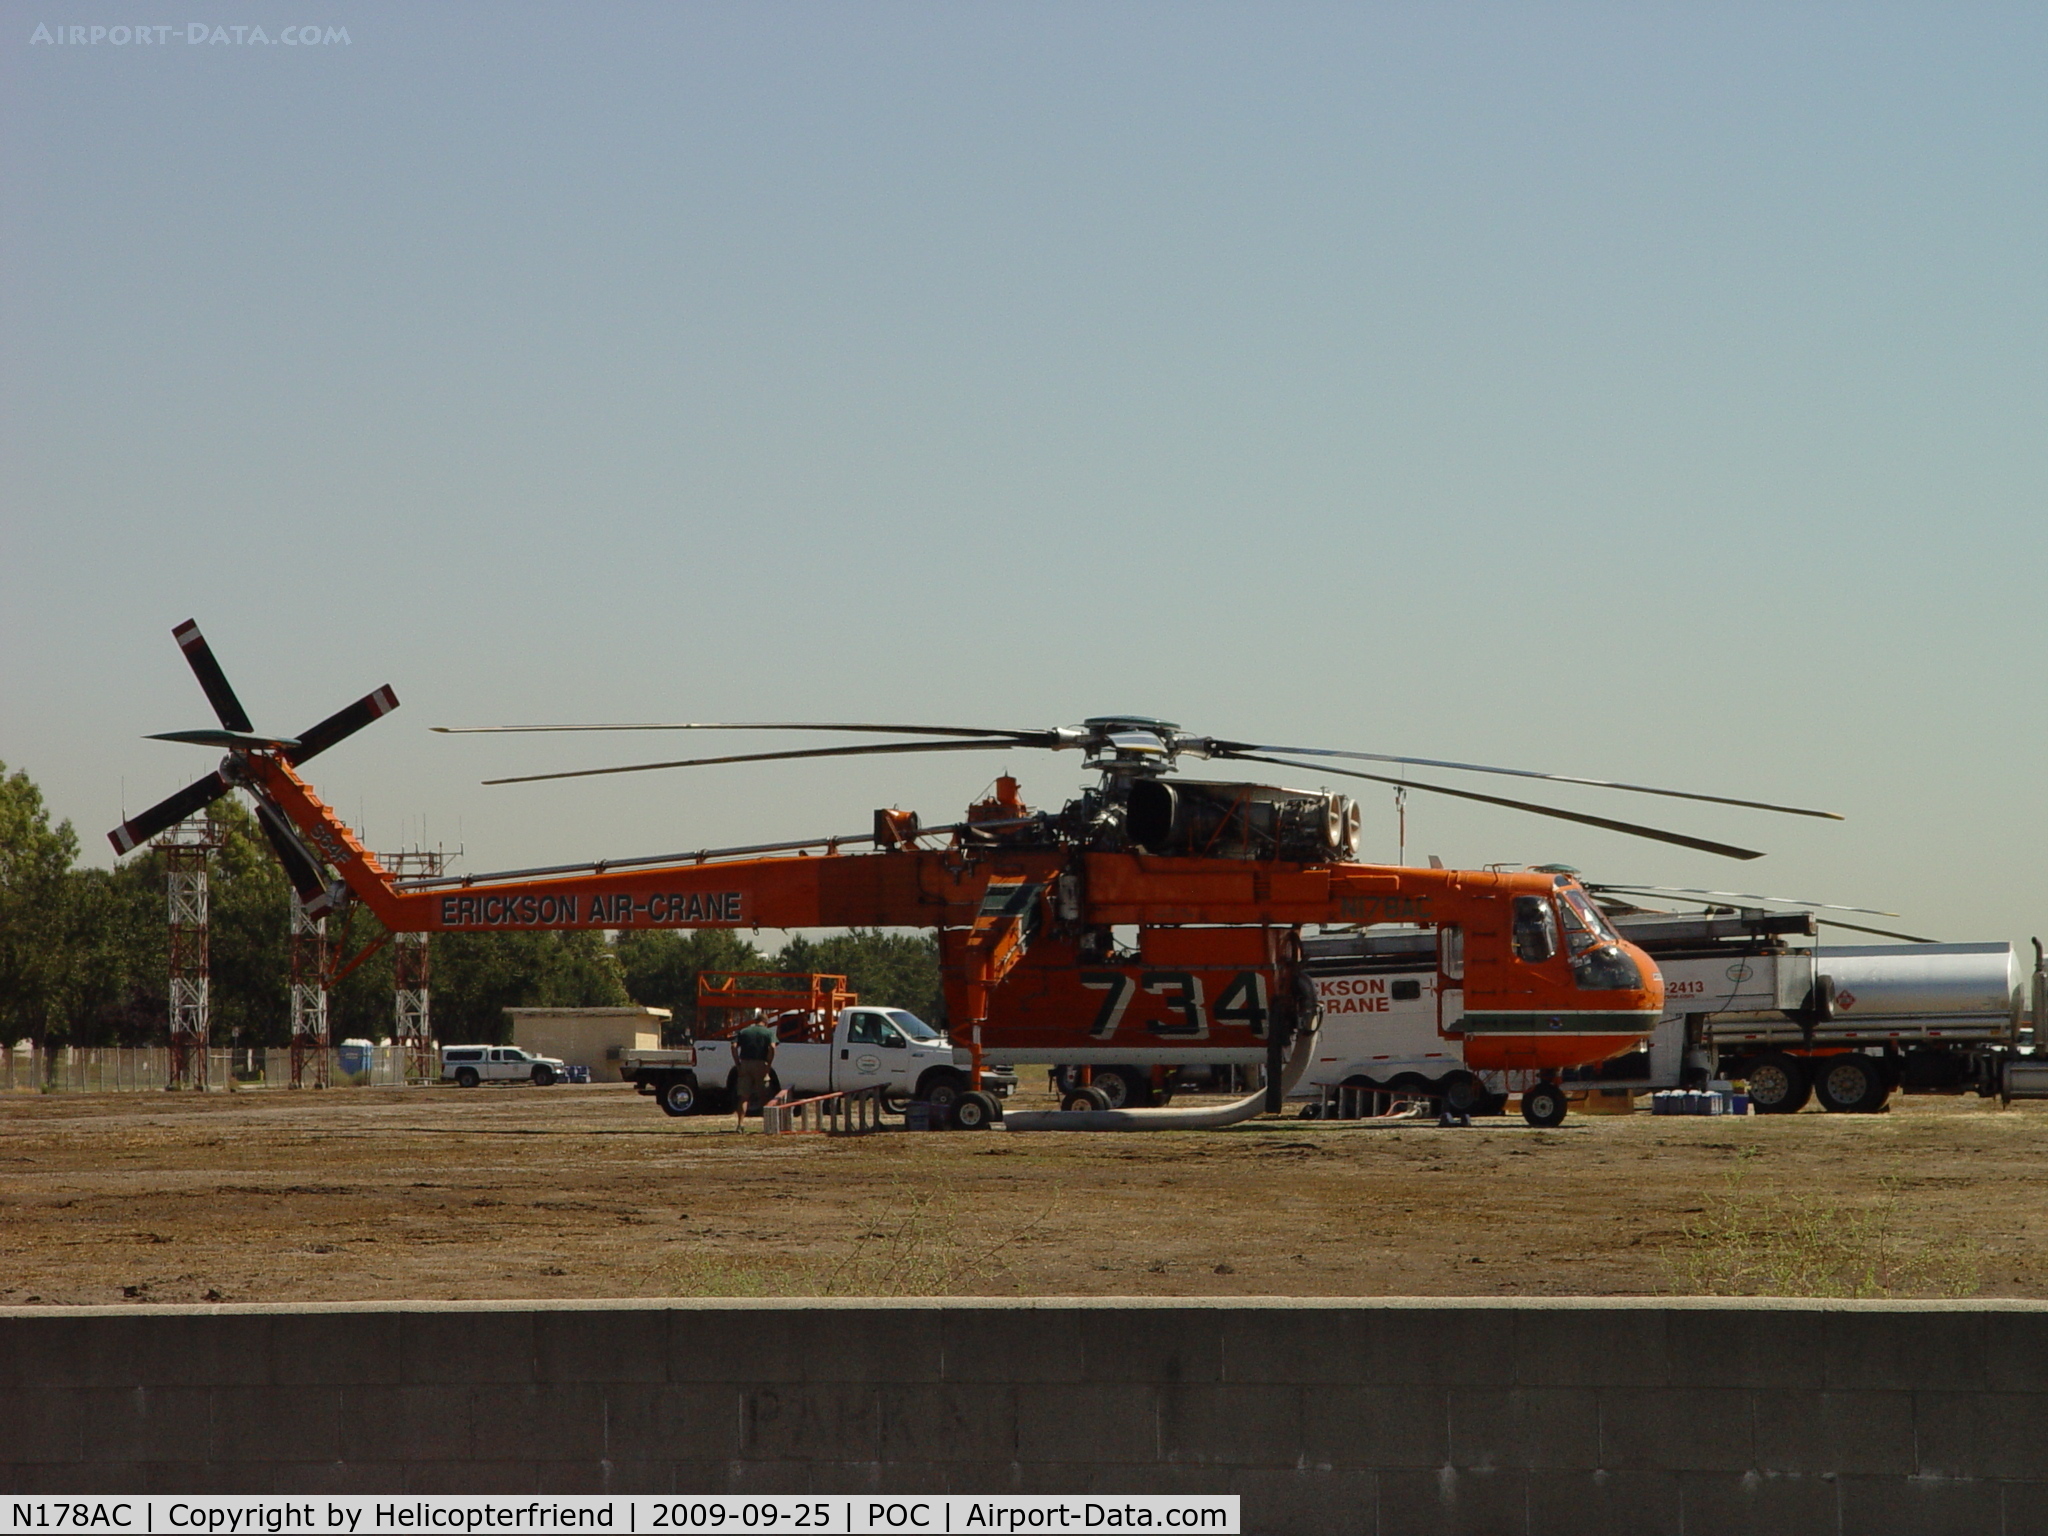 N178AC, 1970 Sikorsky S-64F Skycrane C/N 64097, Windows covered, ship and crew taking a well deserved rest